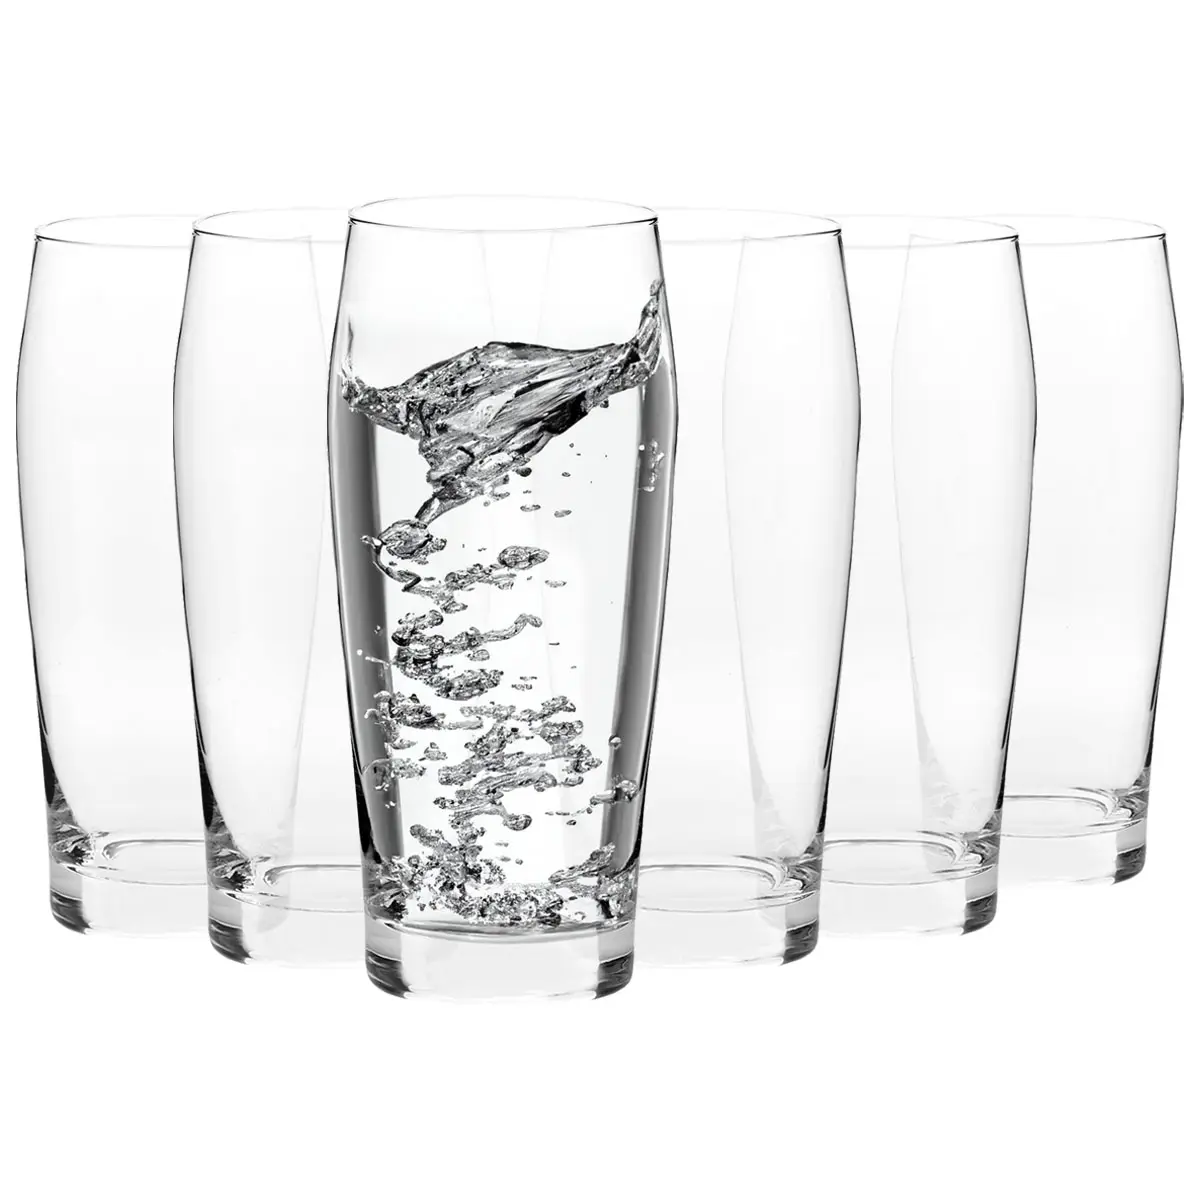 Beer Glass Set - 6-Piece Collection - 10.1 oz  300 ml  Capacity - 150mm - Reputable brand - B2B Wholesale Offer - Krosno Glass